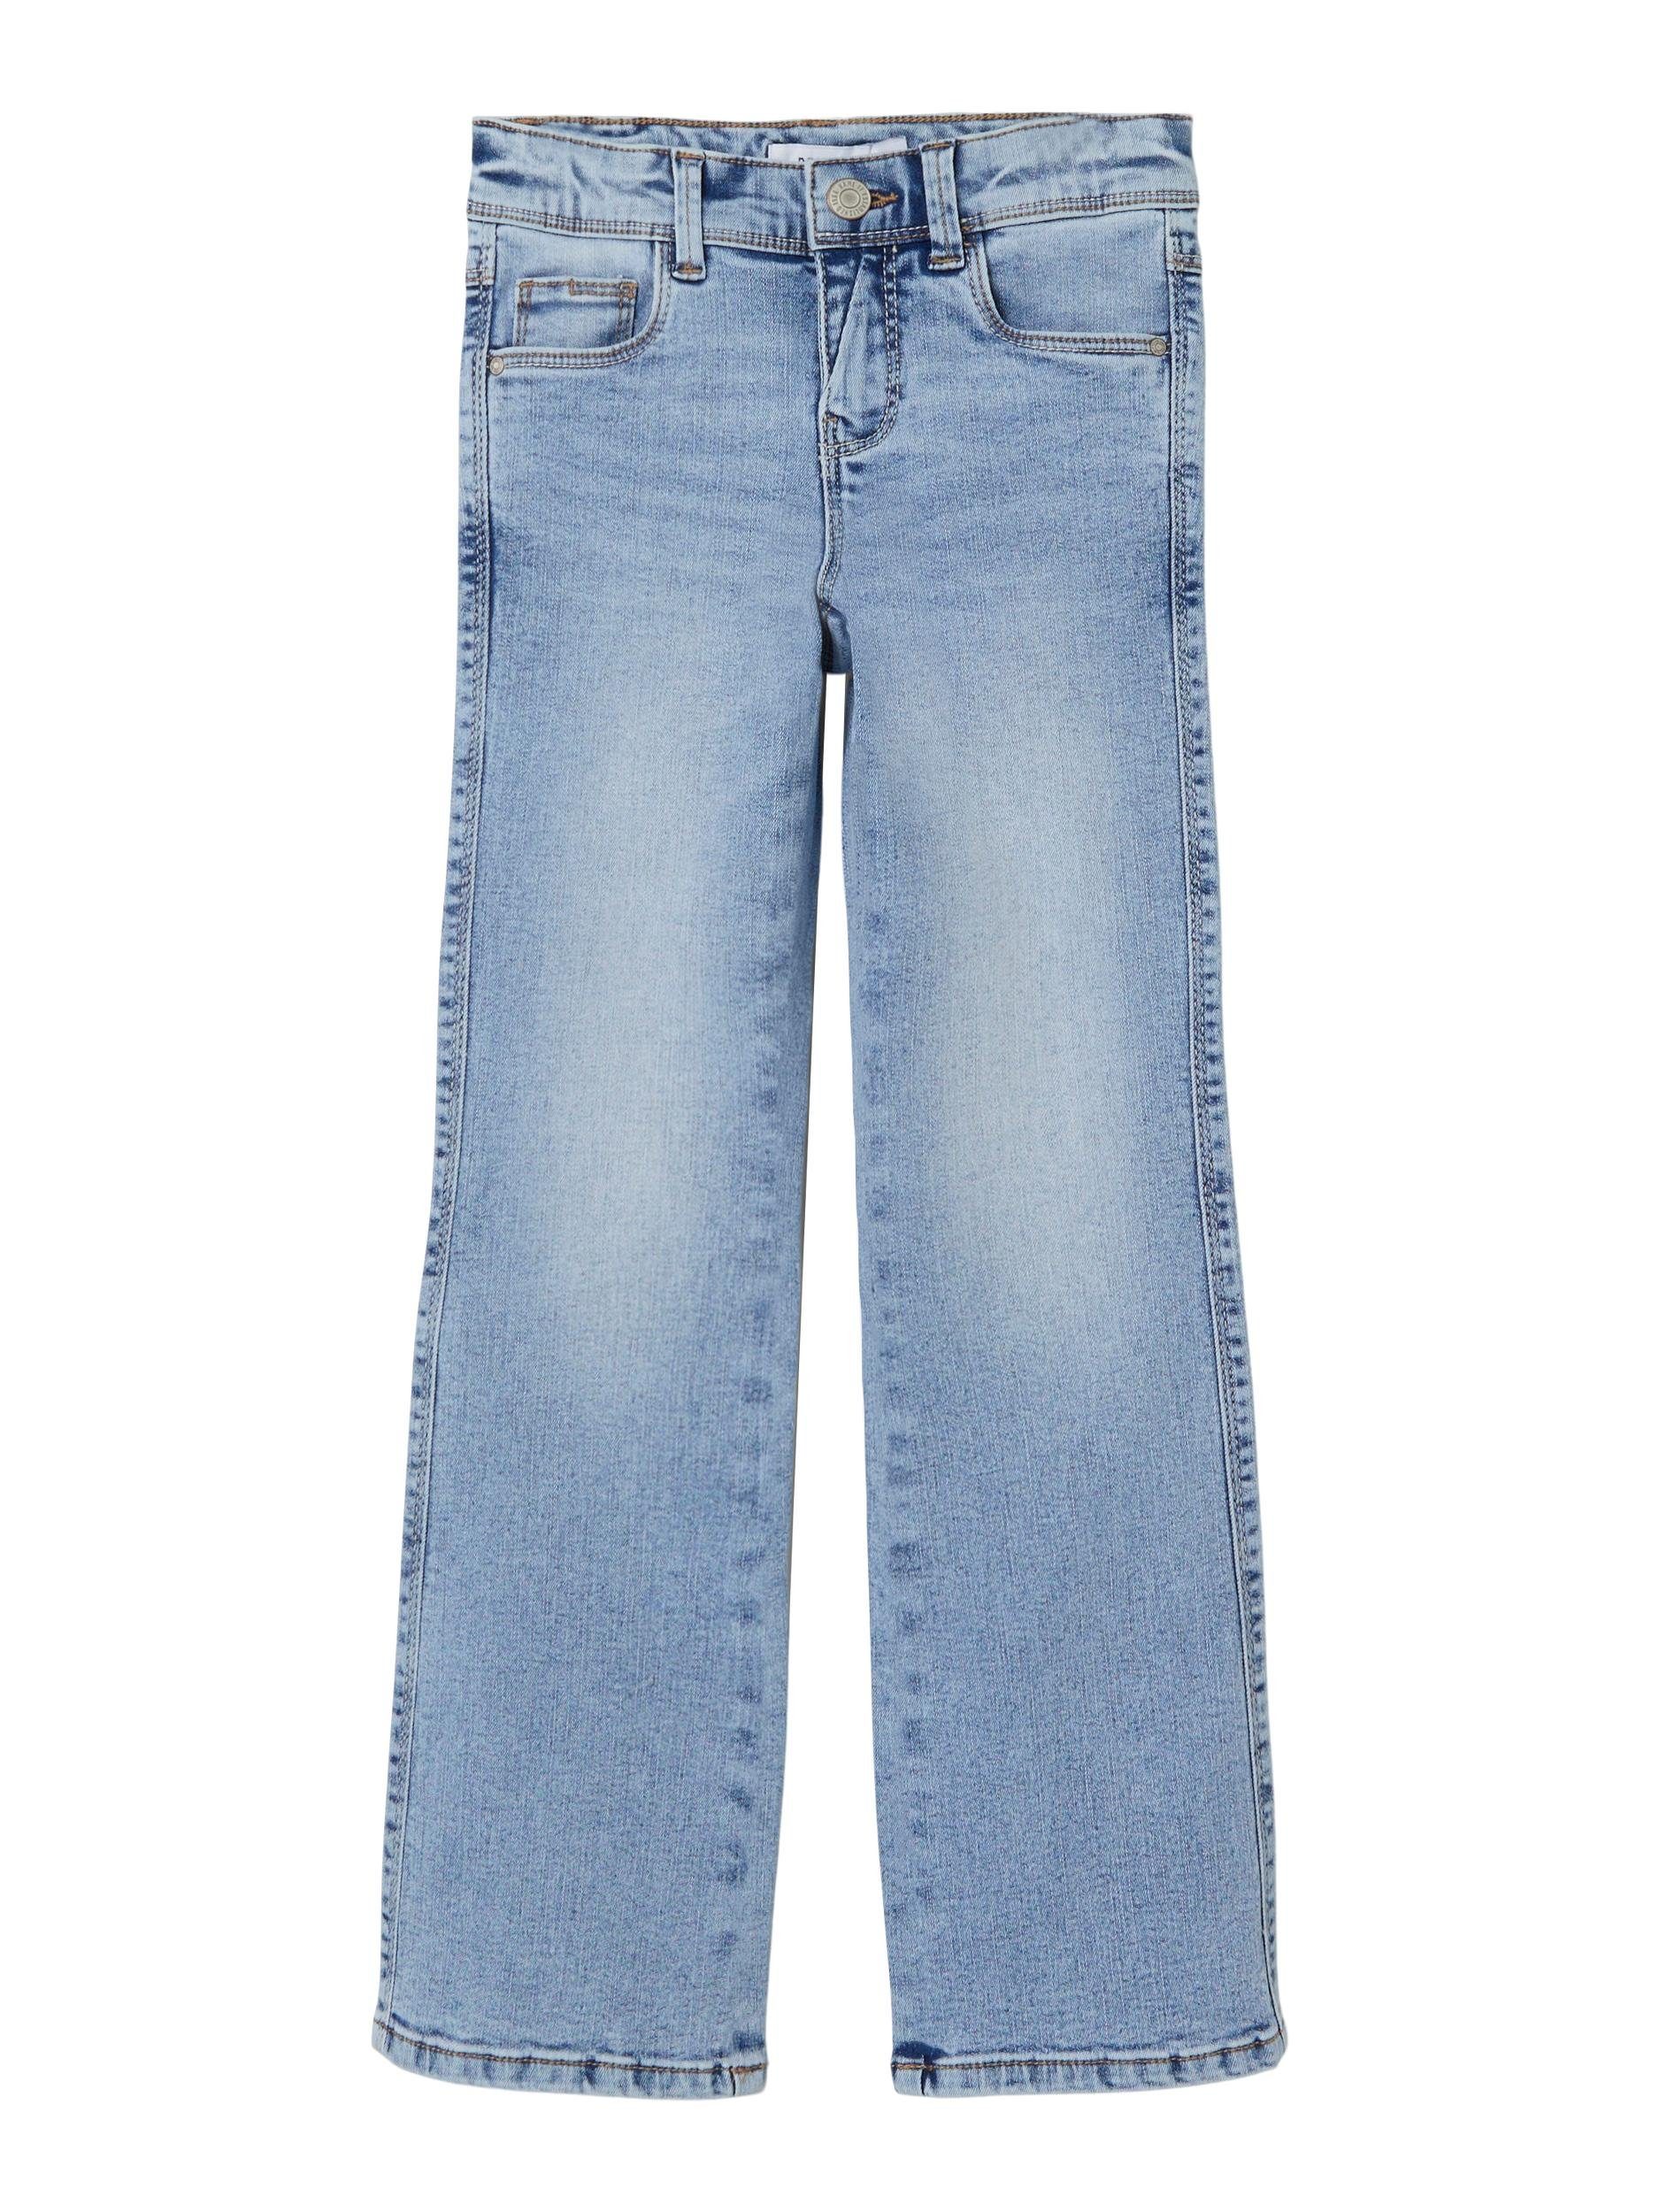 Denim It 1142-AU Stretch NOOS Blue NKFPOLLY mit Bootcut-Jeans BOOT SKINNY Light JEANS Name